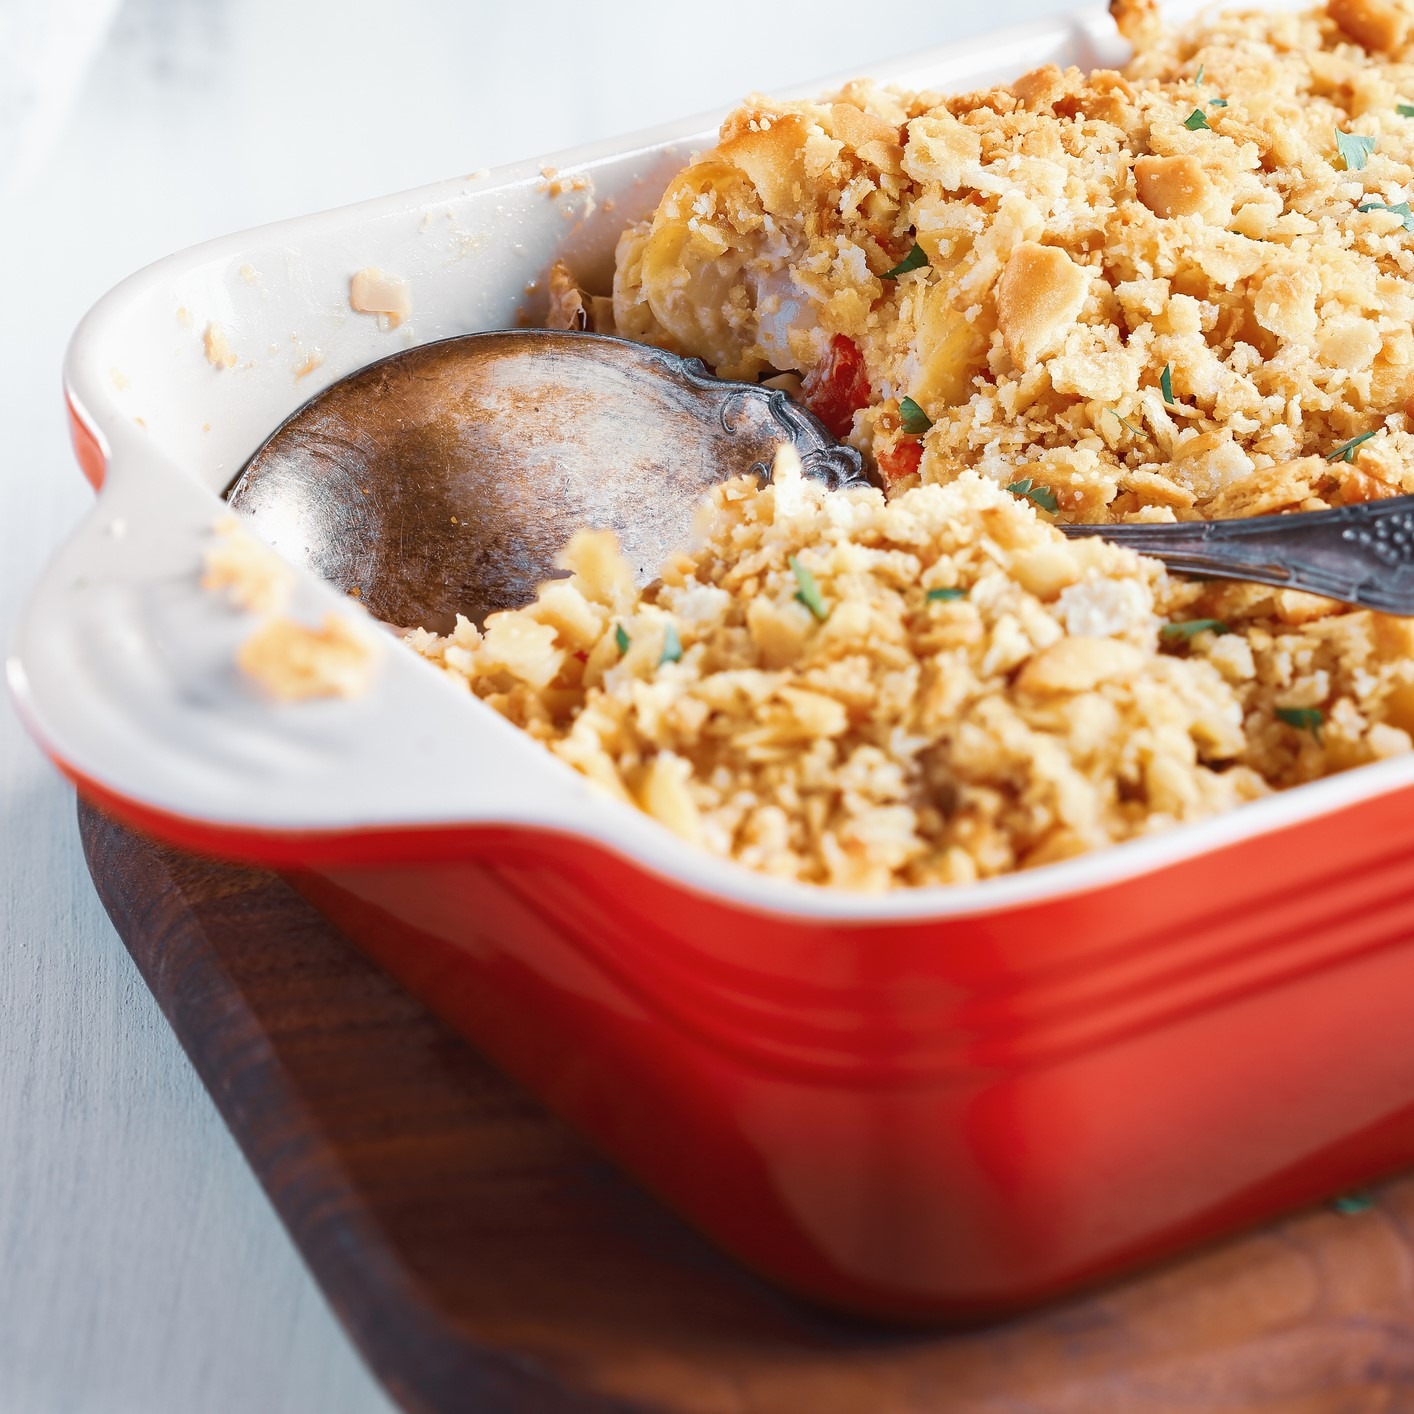 Chicken and veggie casserole with crumbled cracker top. Red casserole dish and big silver serving spoon.